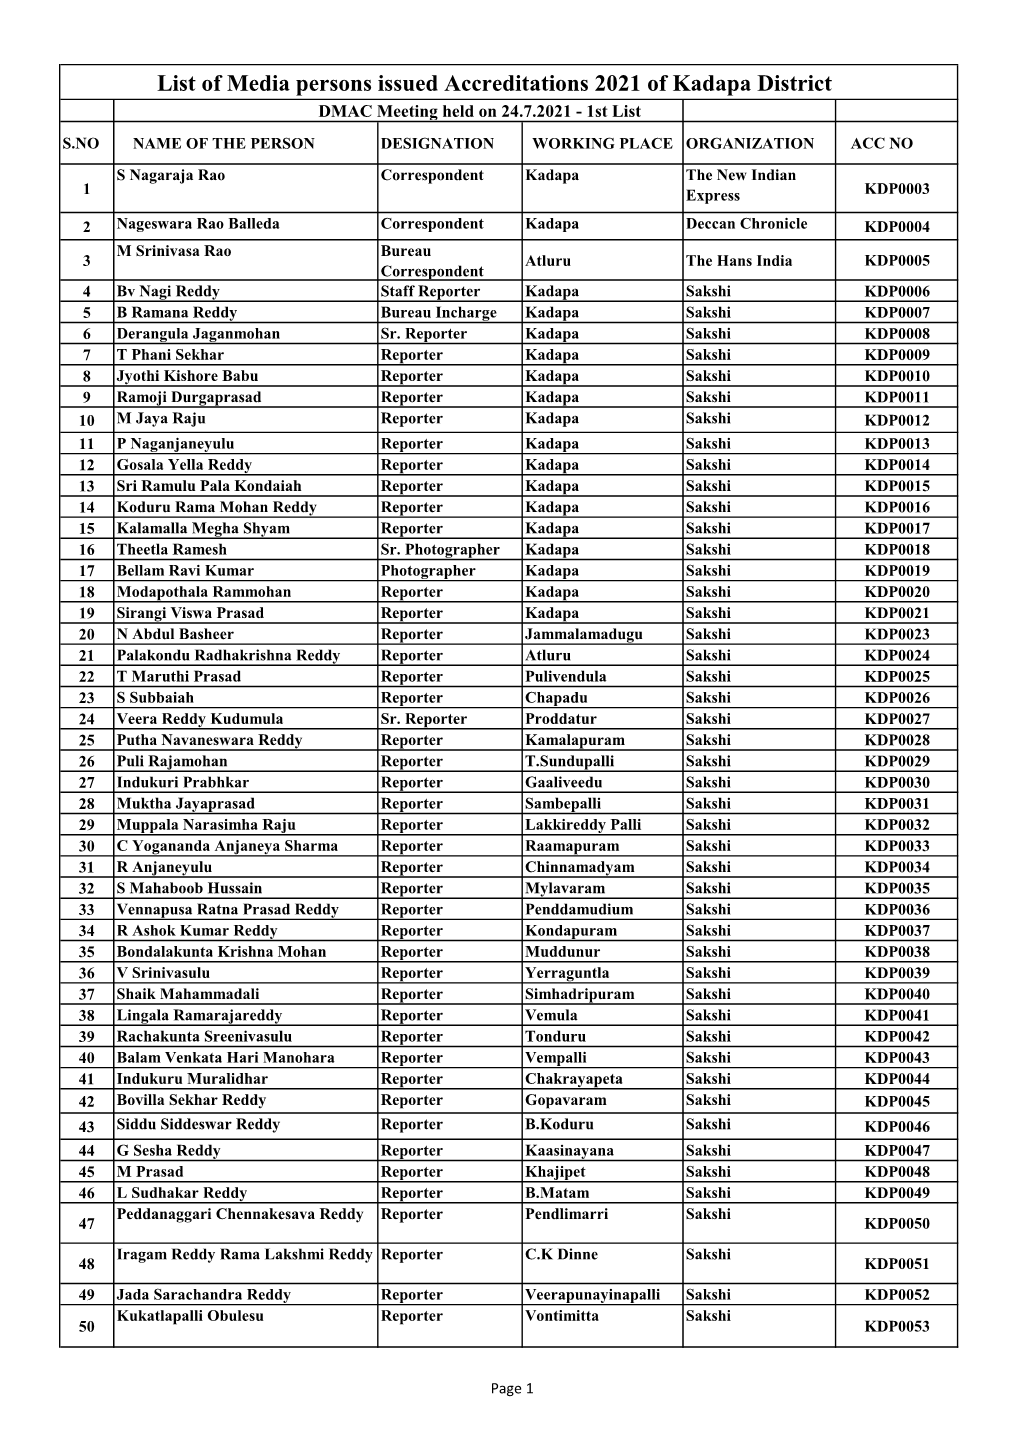 List of Media Persons Issued Accreditations 2021 of Kadapa District